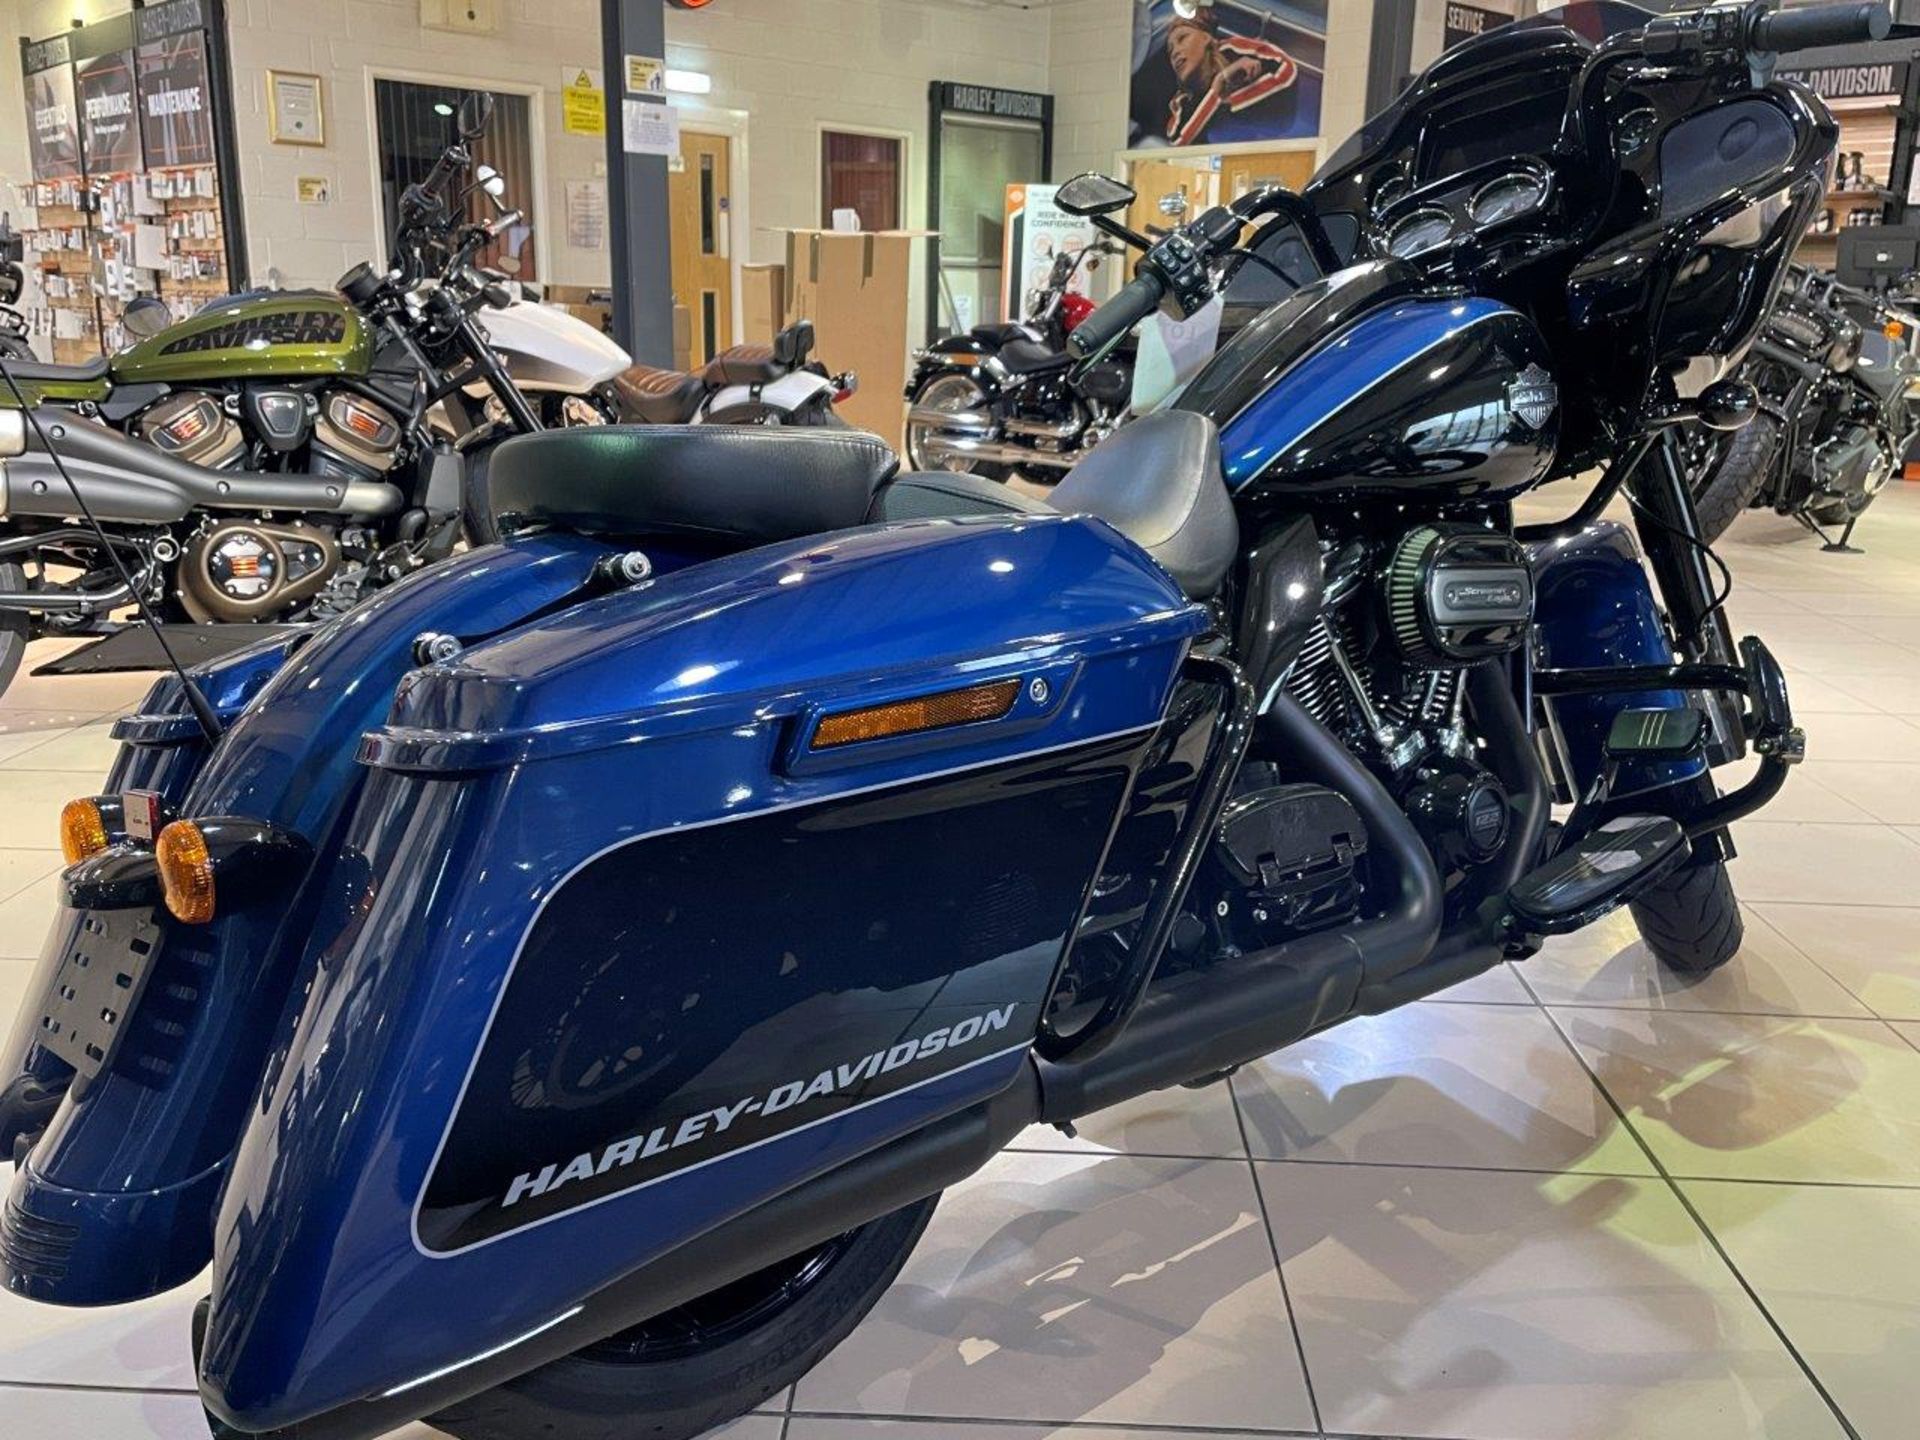 Harley Davidson FLTRXS Road Glide Special, with stage 3 upgrade Motorbike (May 2022) - Image 3 of 20